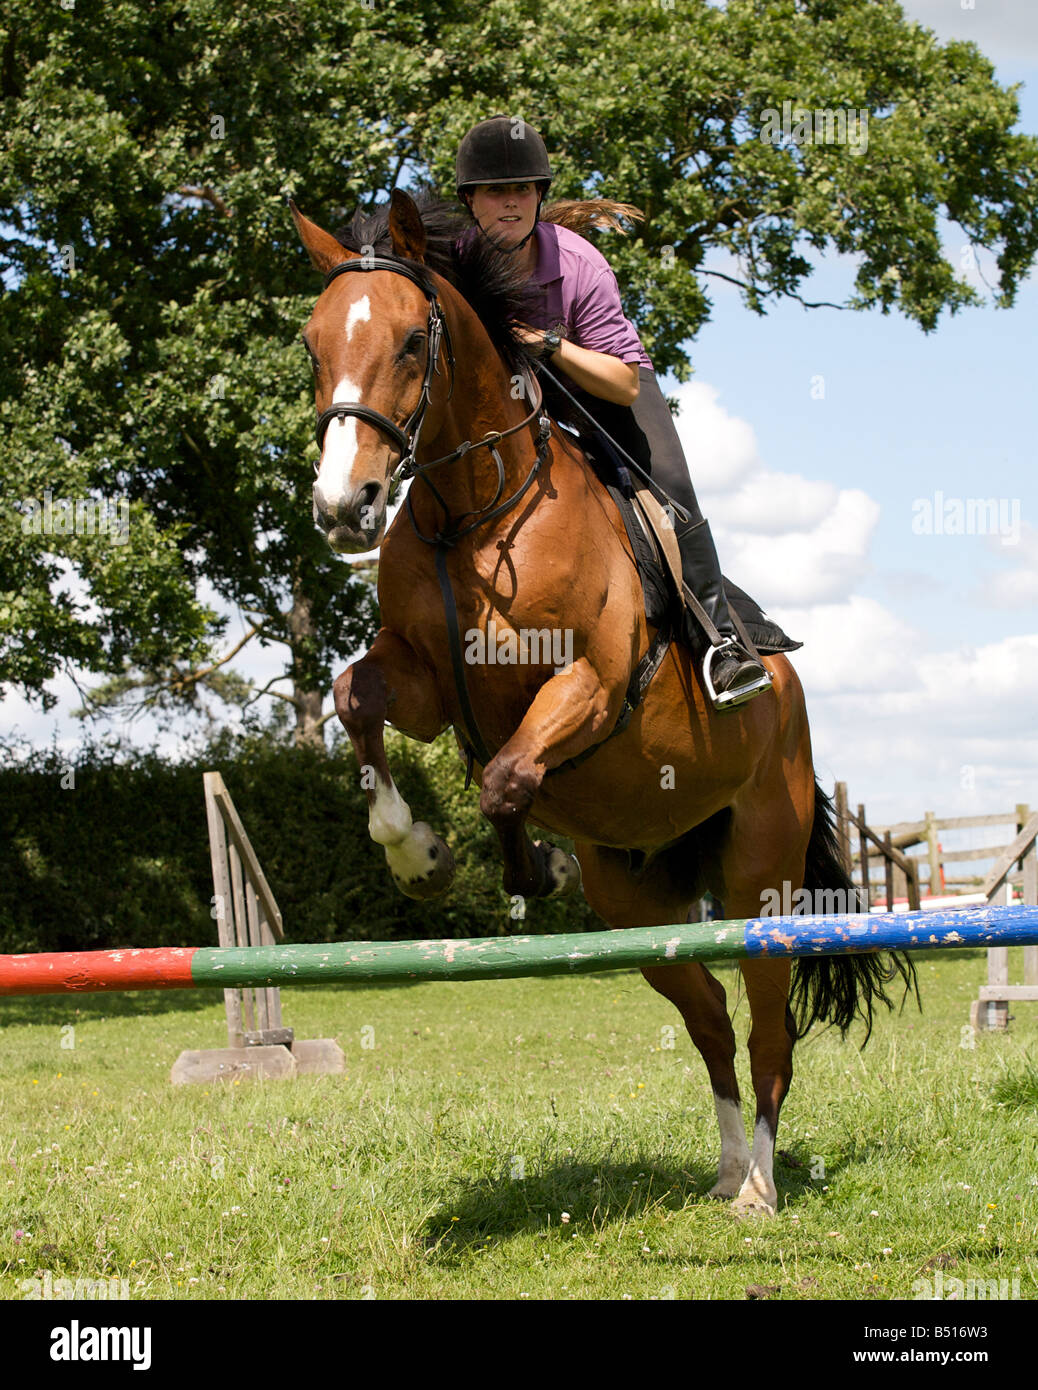 Rider and horse jumping. Stock Photo